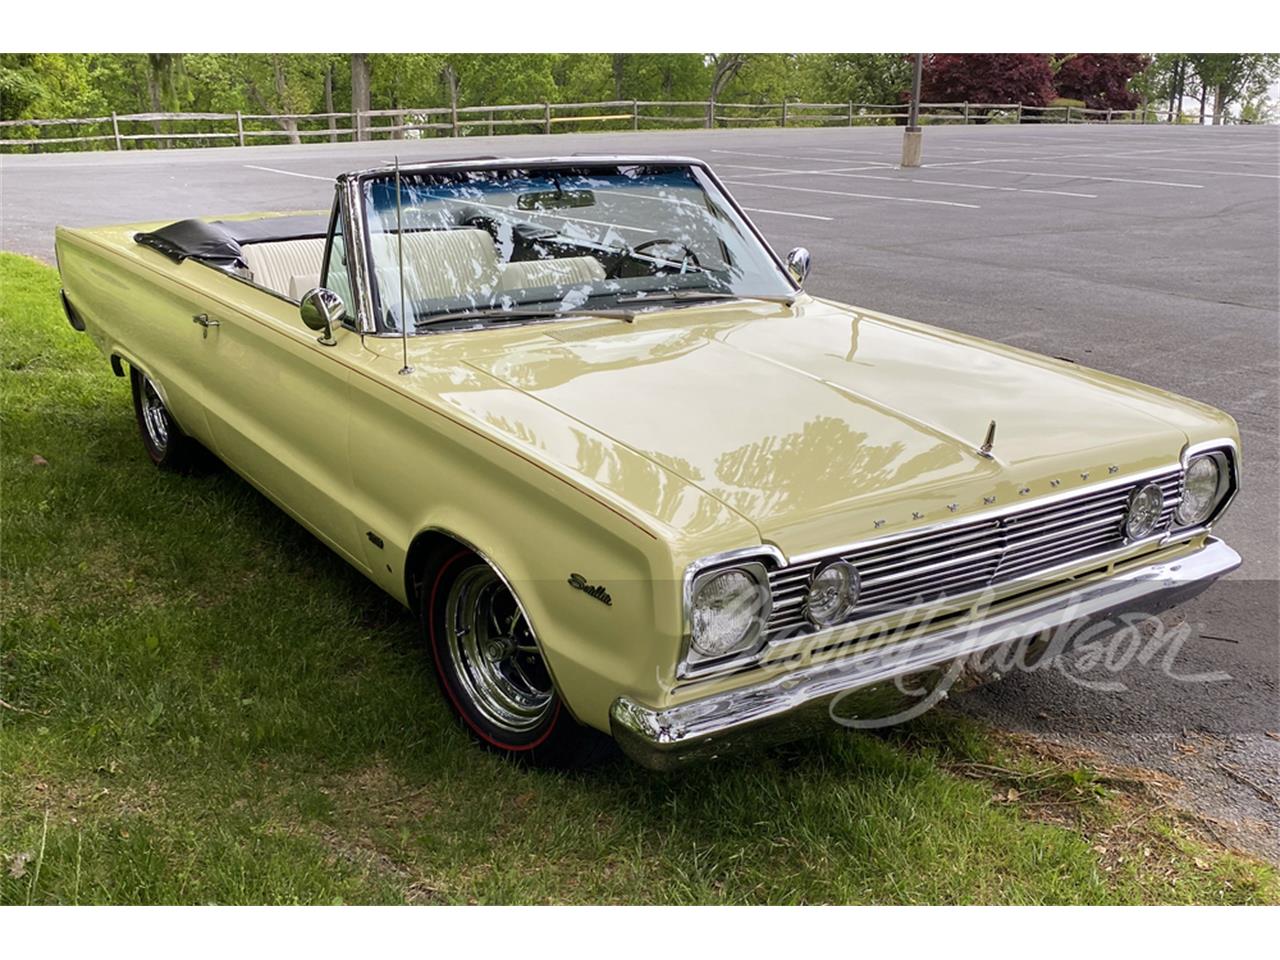 For Sale at Auction: 1966 Plymouth Satellite in Scottsdale, Arizona for sale in Scottsdale, AZ